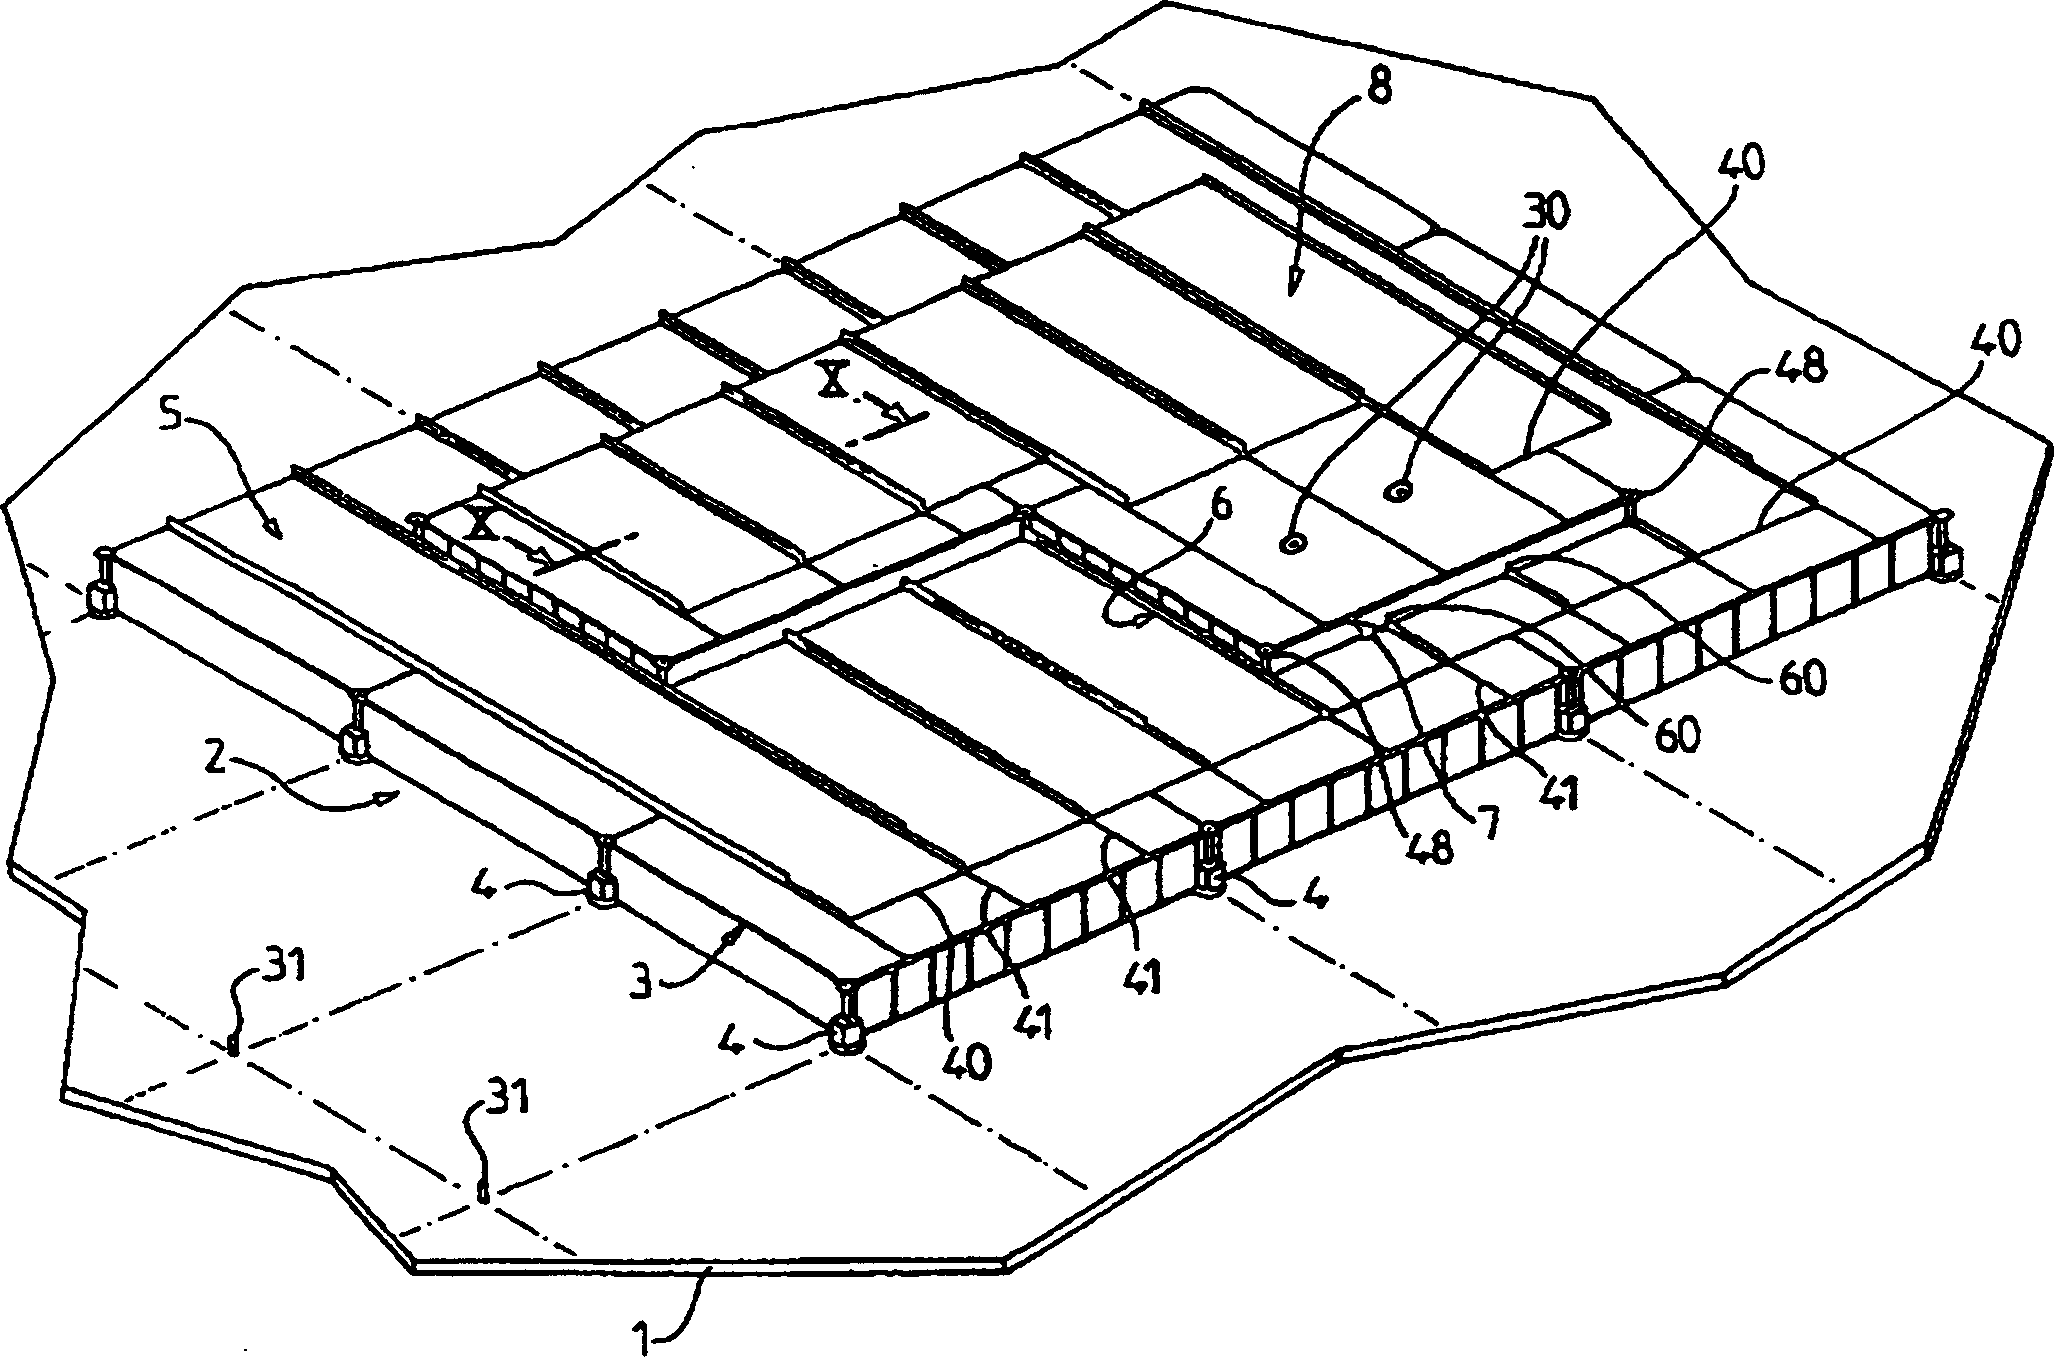 Sealed, thermally insulated tank incorporated into the load-bearing structure of a ship